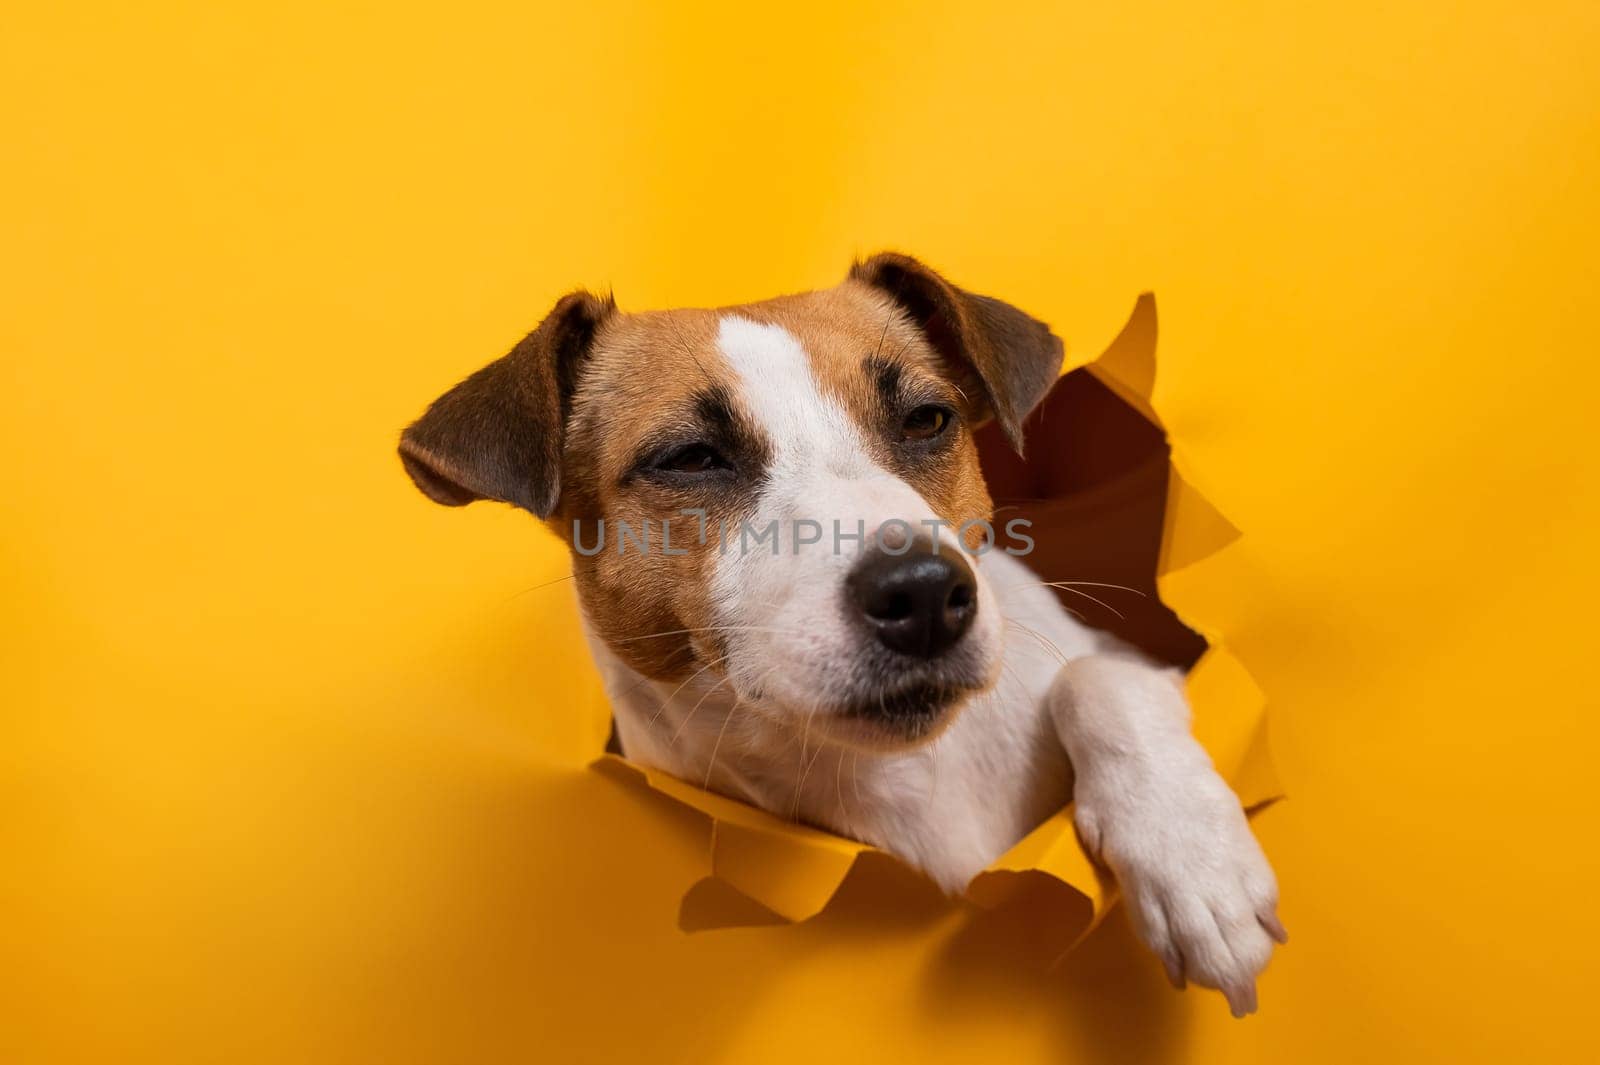 Funny jack russell terrier comes out of a paper orange background tearing it. by mrwed54